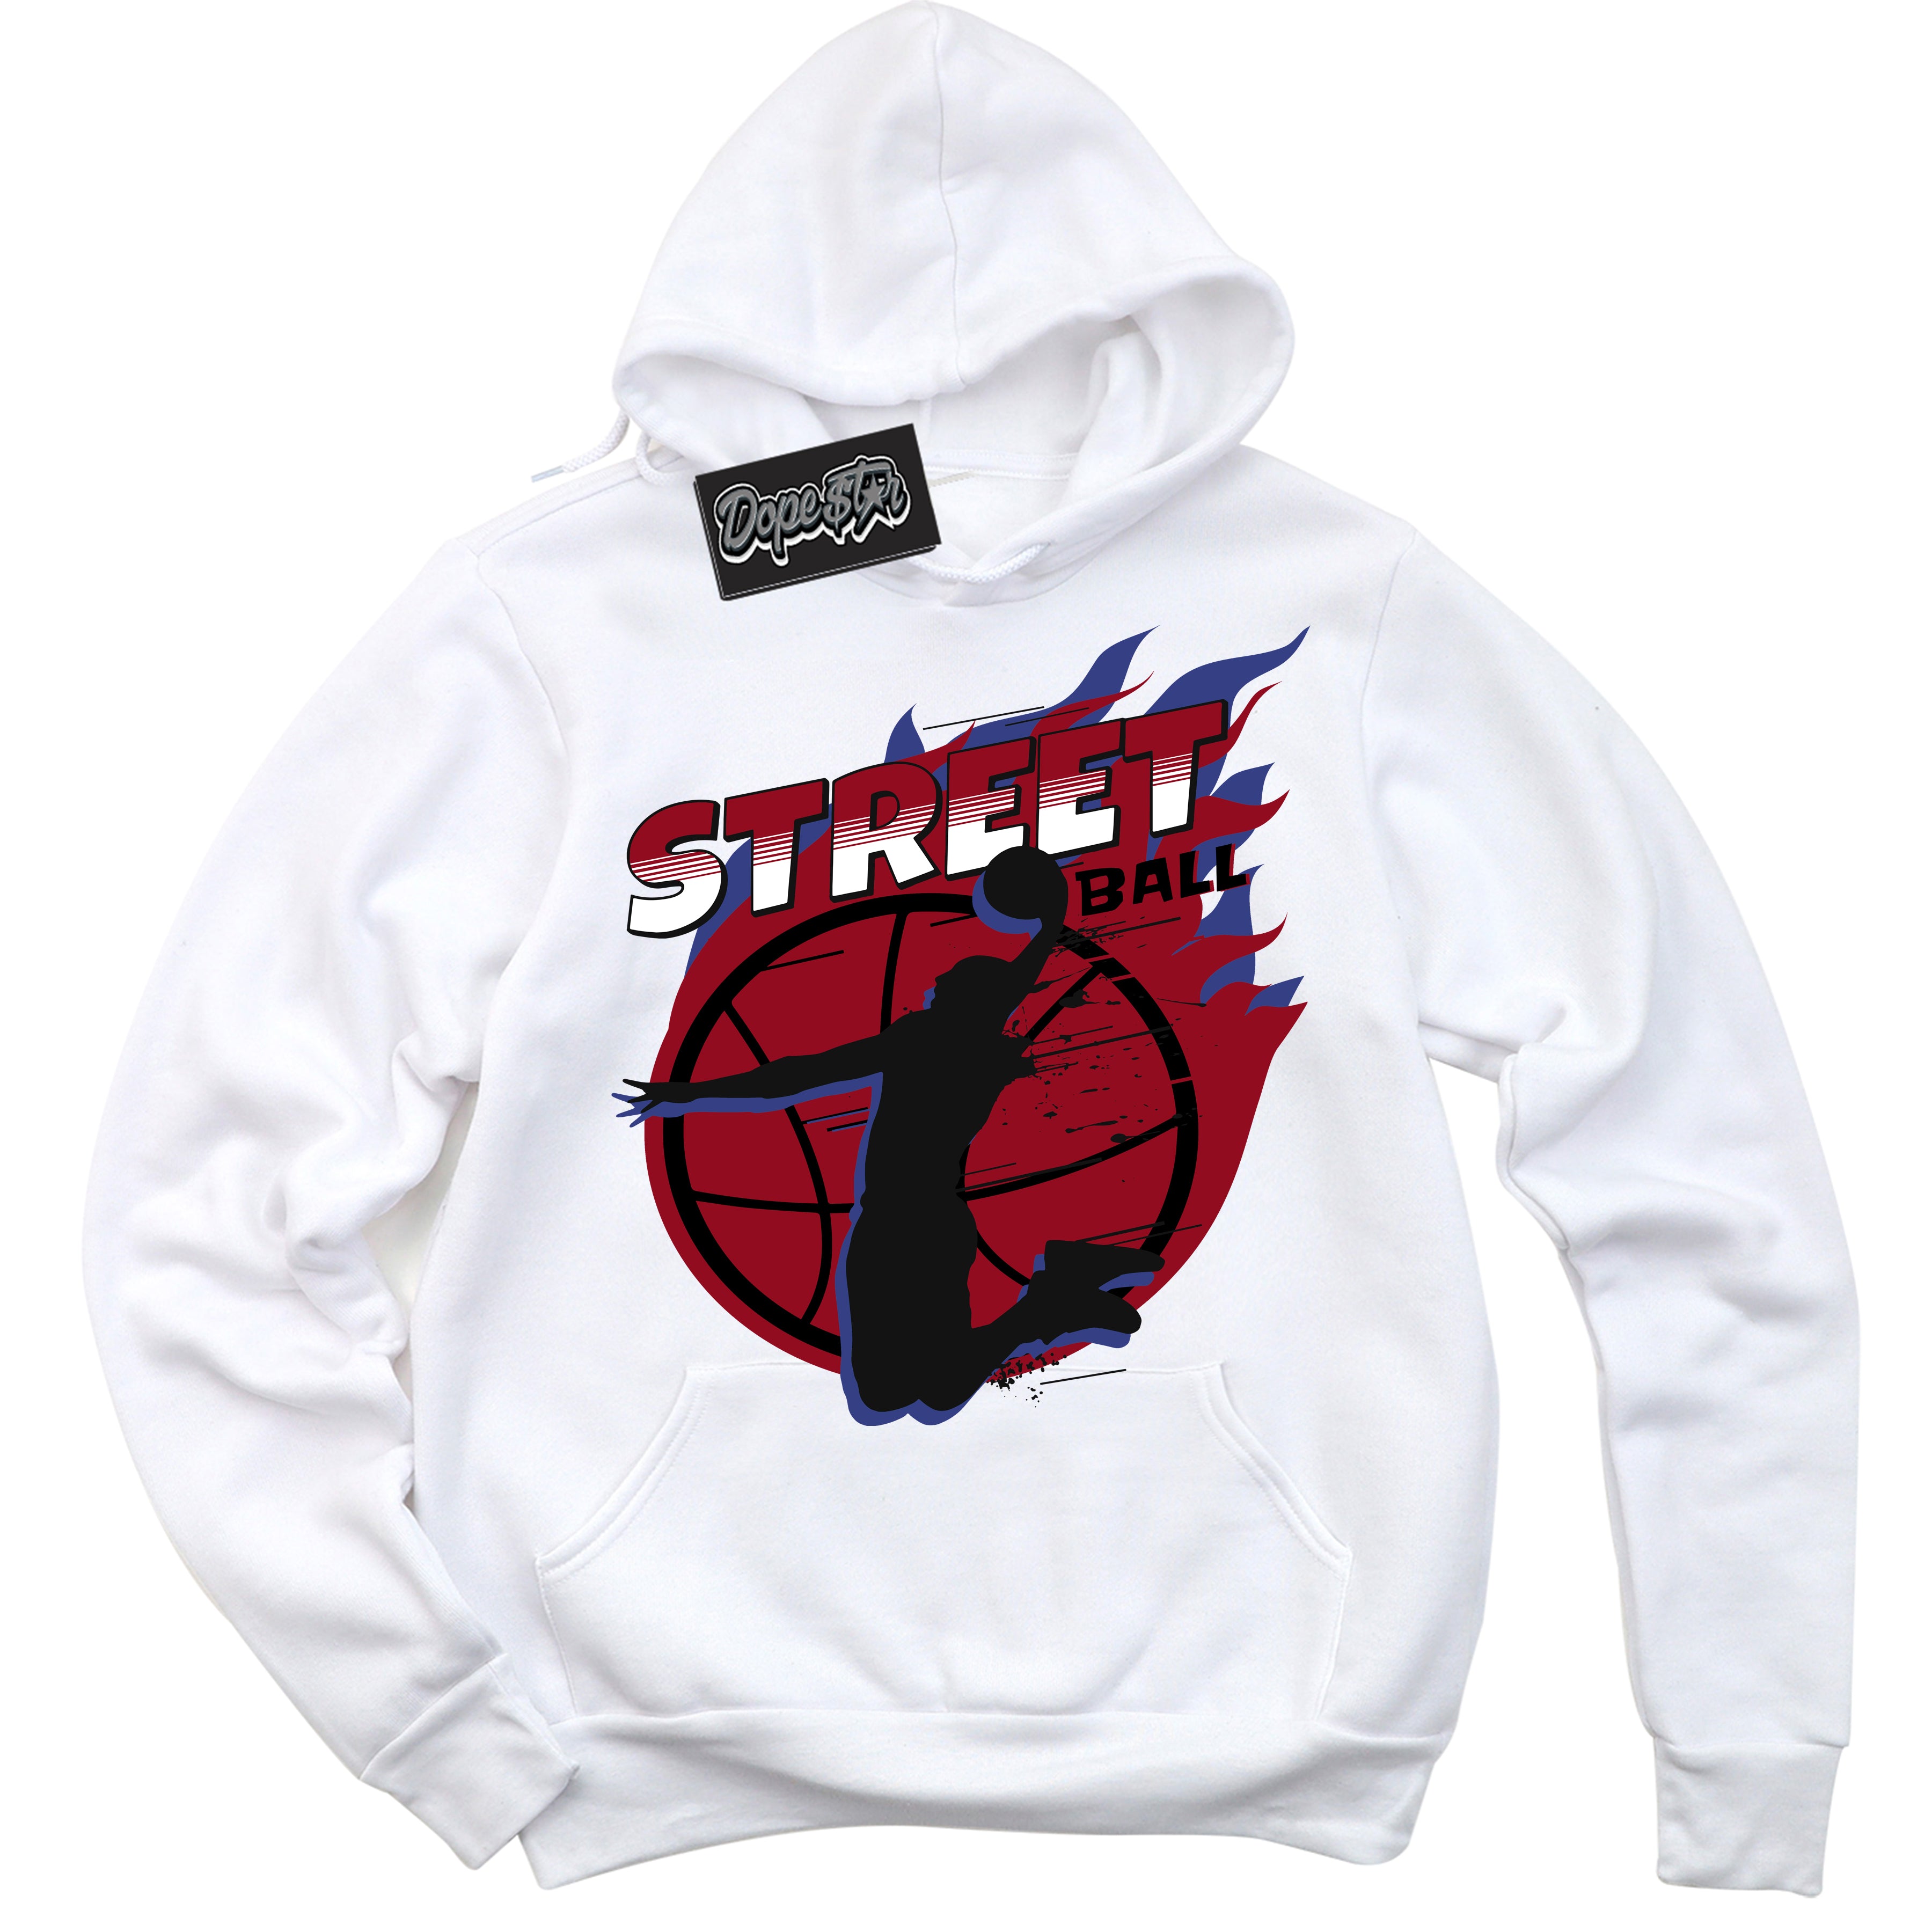 Cool White Hoodie with “ Street Ball ”  design that Perfectly Matches Playoffs 8s Sneakers.